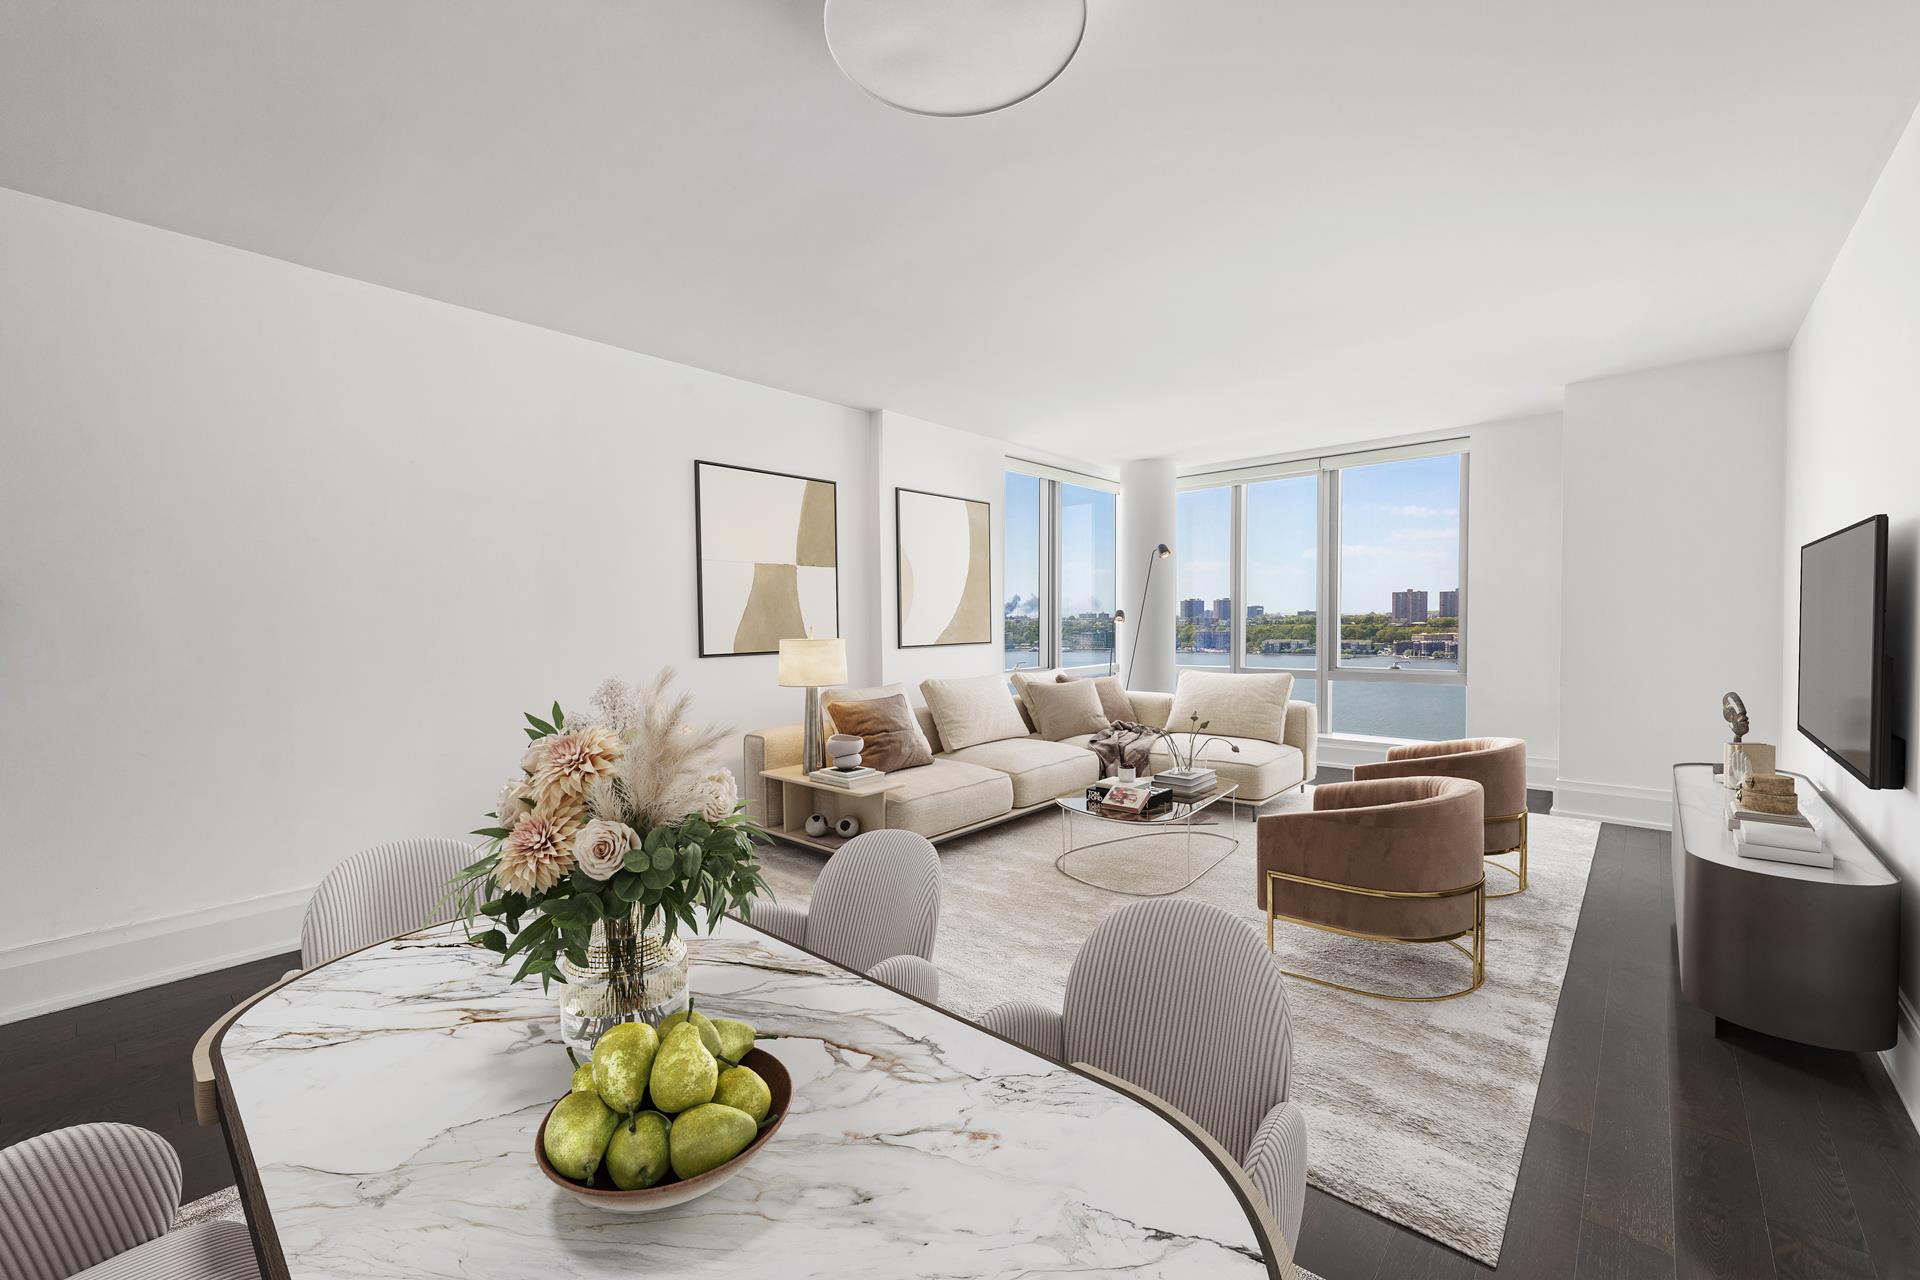 50 Riverside Boulevard 20A, Lincoln Sq, Upper West Side, NYC - 2 Bedrooms  
2.5 Bathrooms  
5 Rooms - 